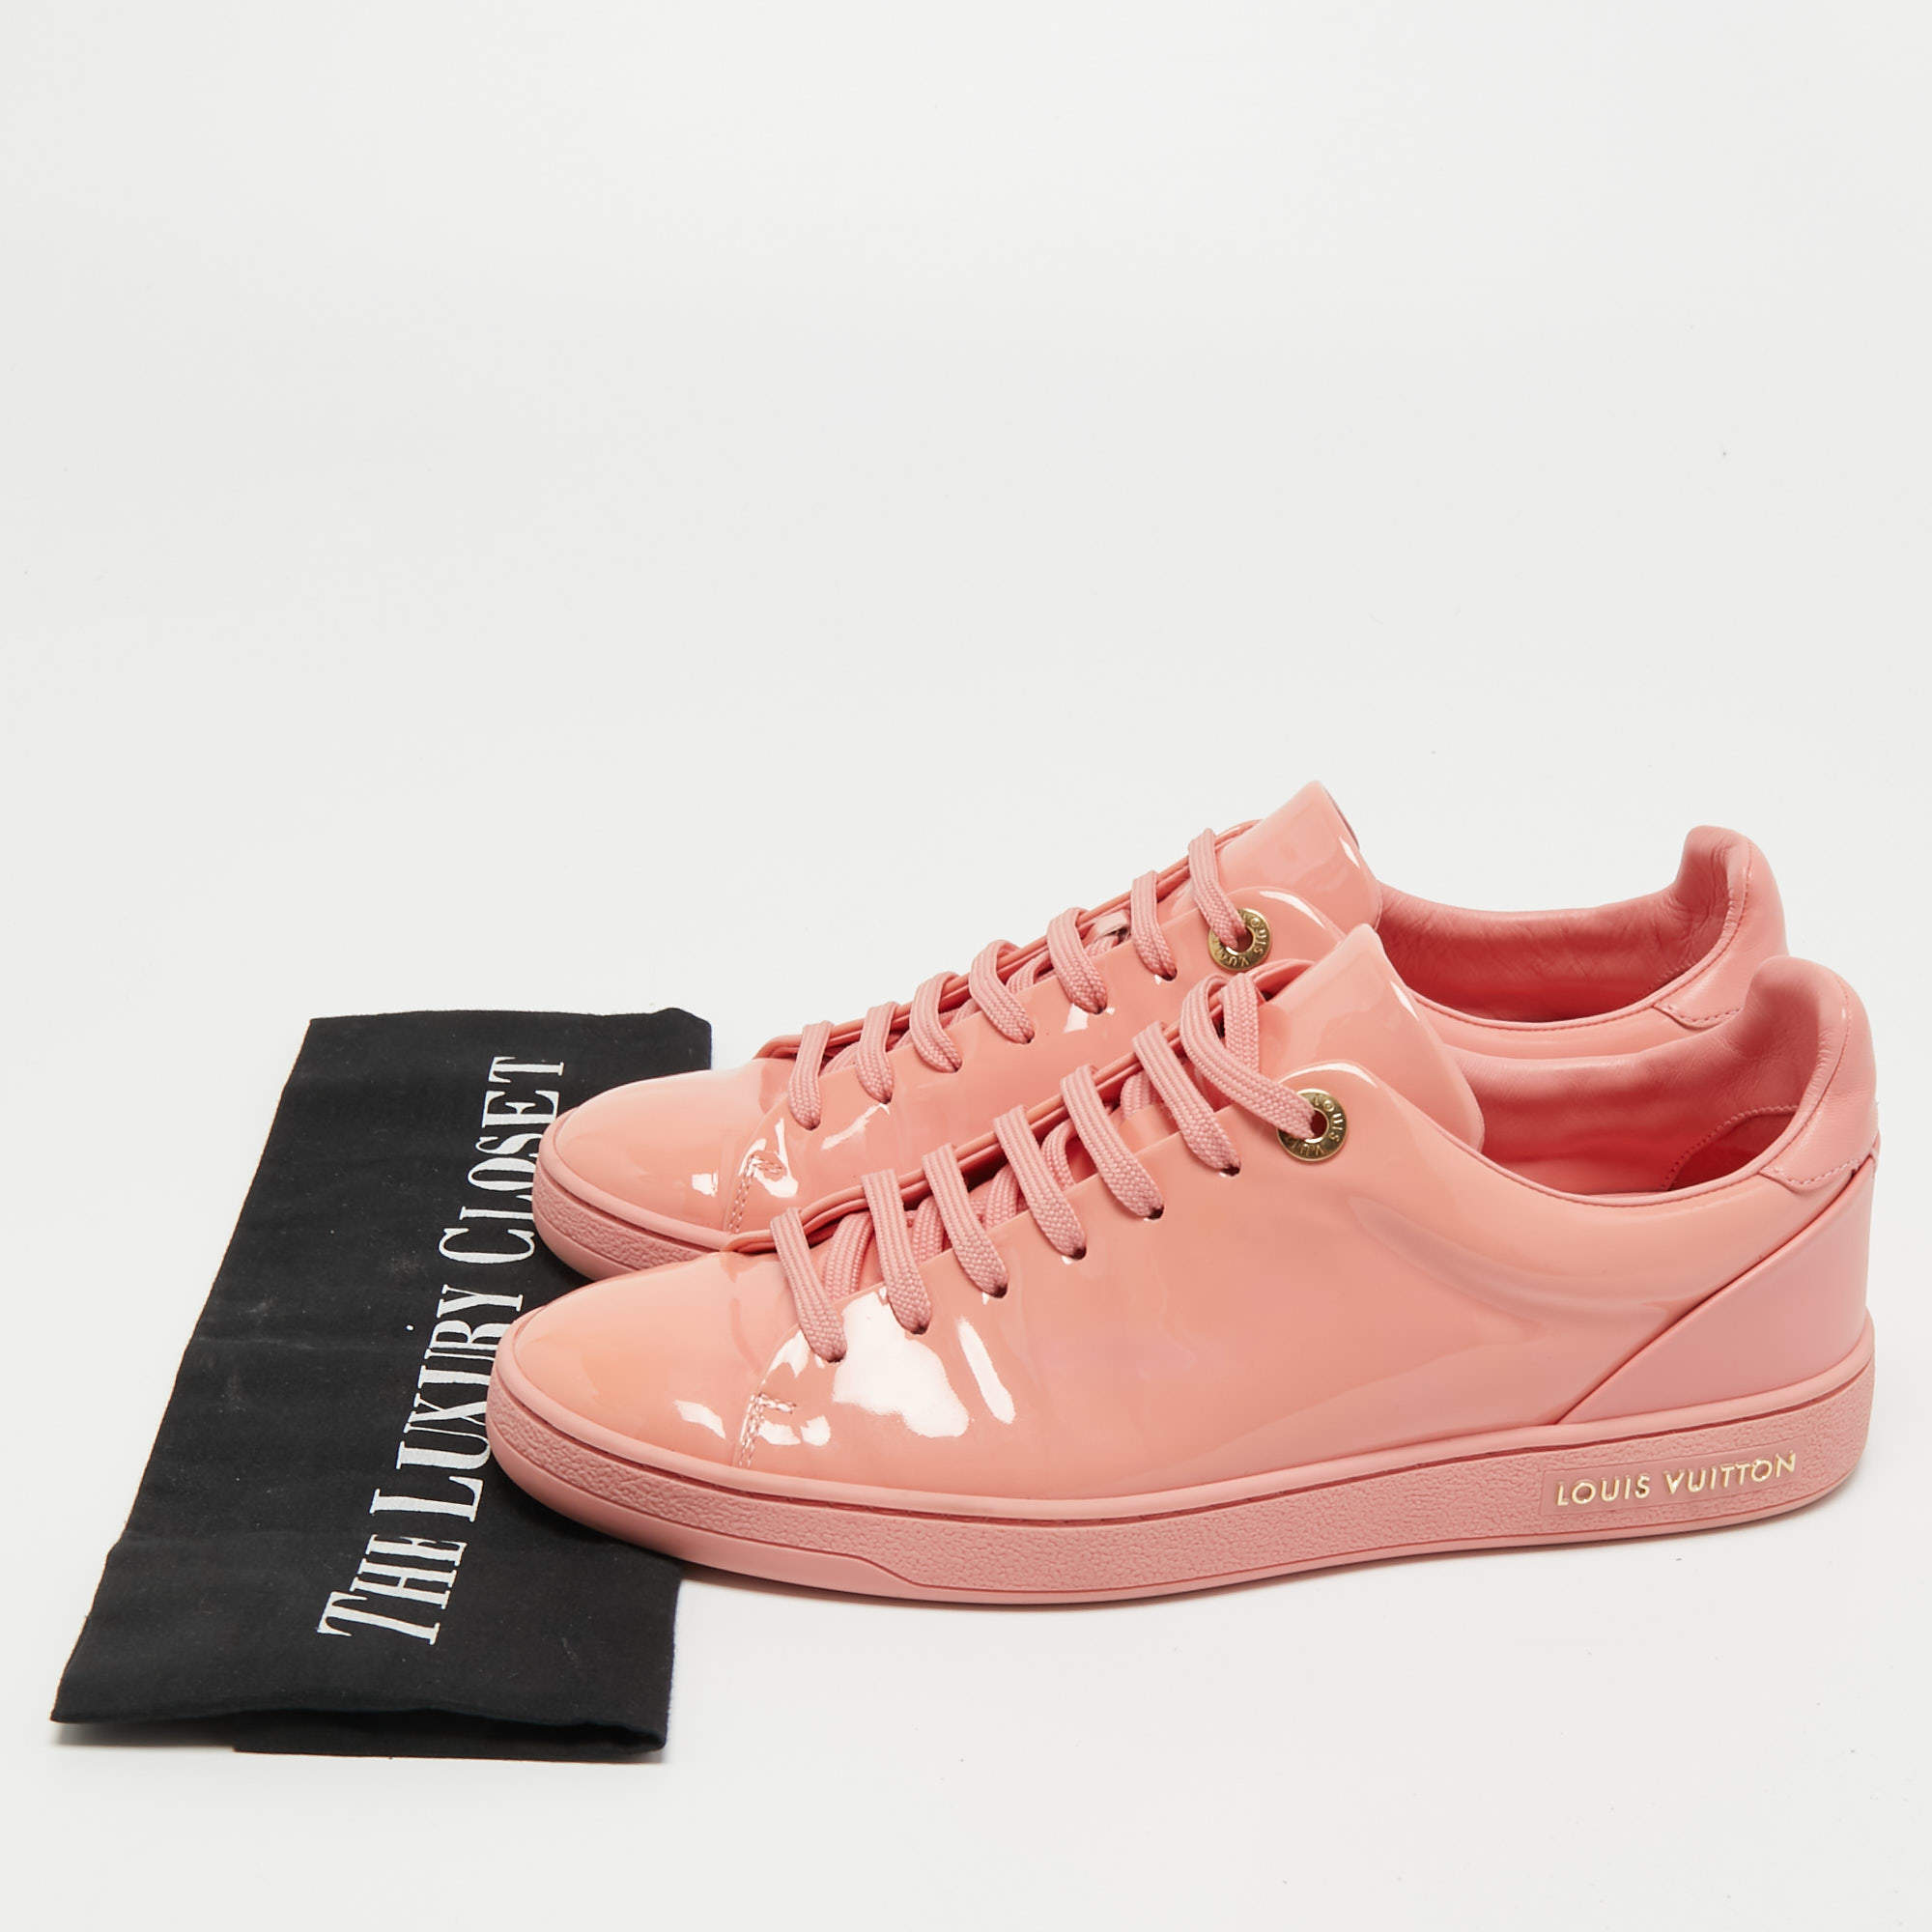 Louis Vuitton Peach Patent Leather Frontrow Sneakers Size 37 Louis